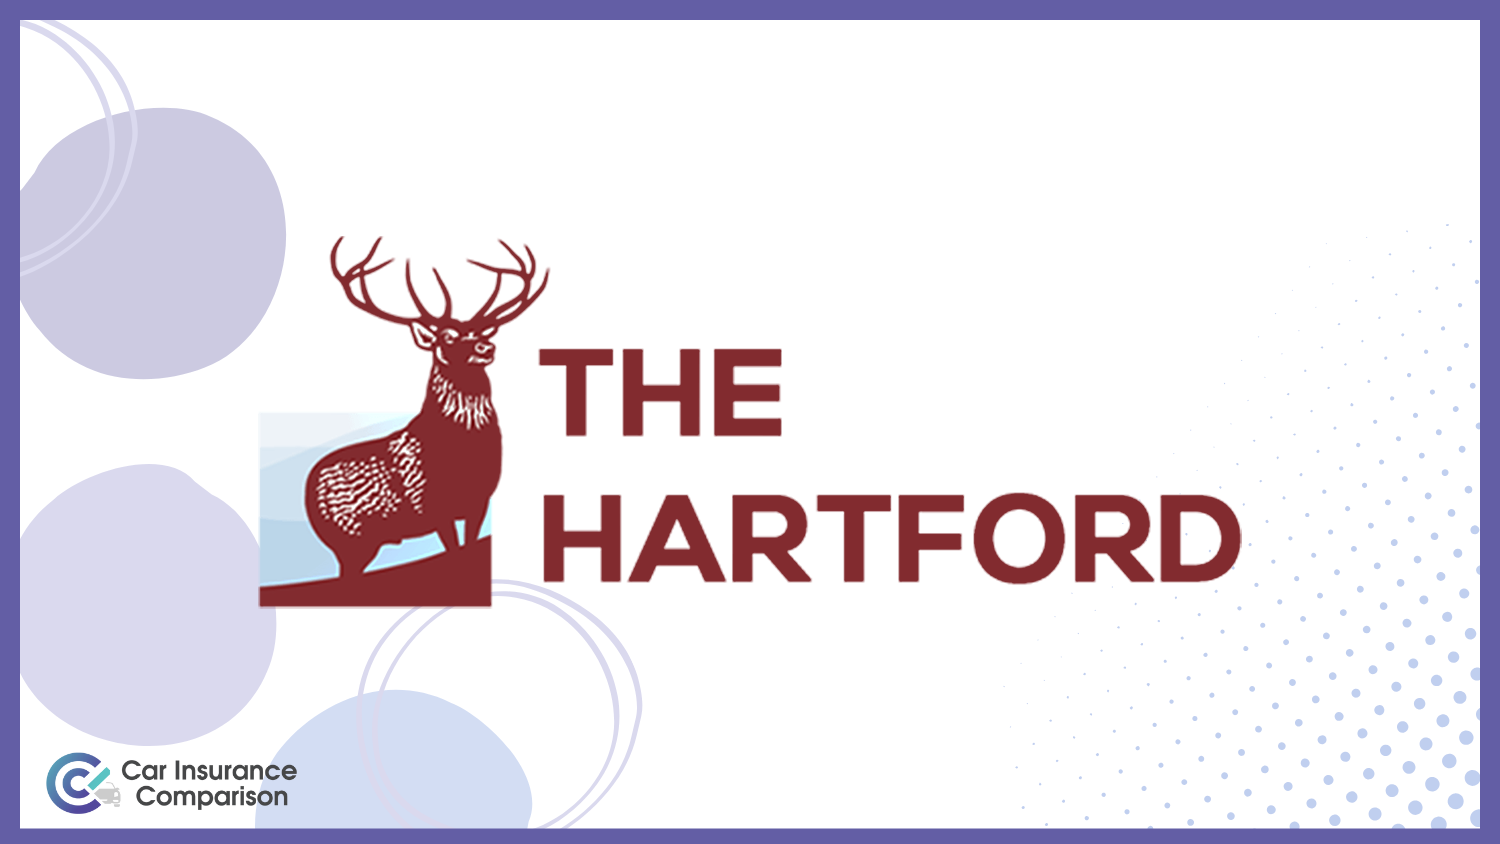 The Hartford: Best Professional Group Car Insurance Discounts